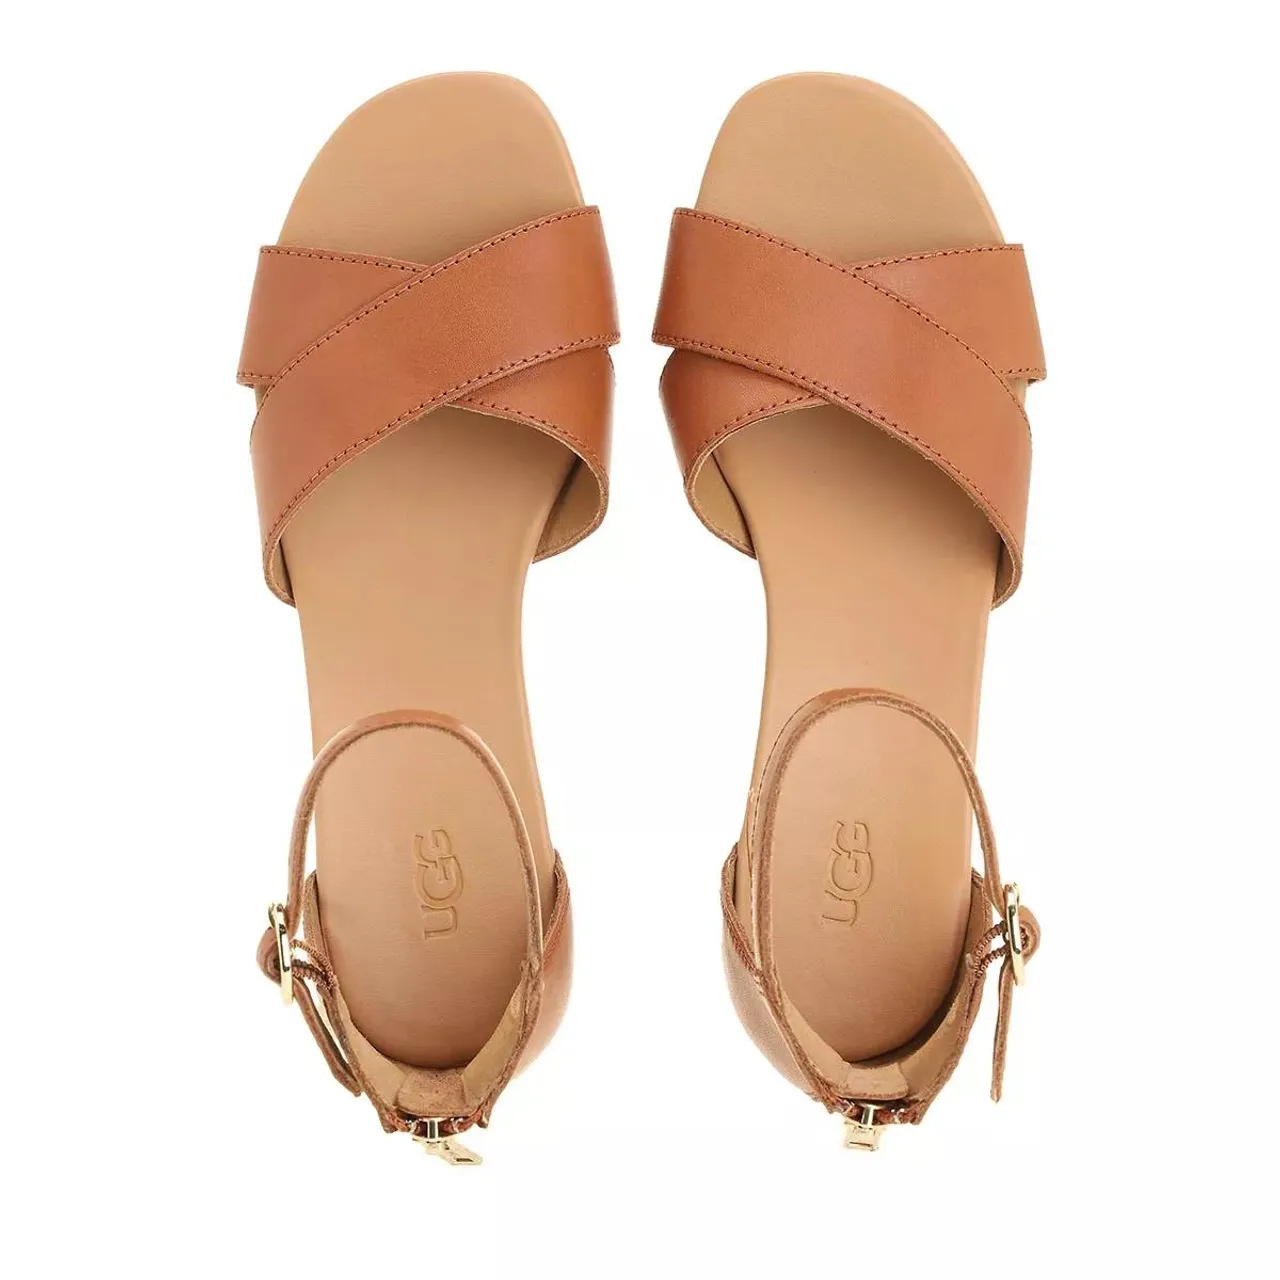 UGG Sandals - W Eugenia - brown - Sandals for ladies